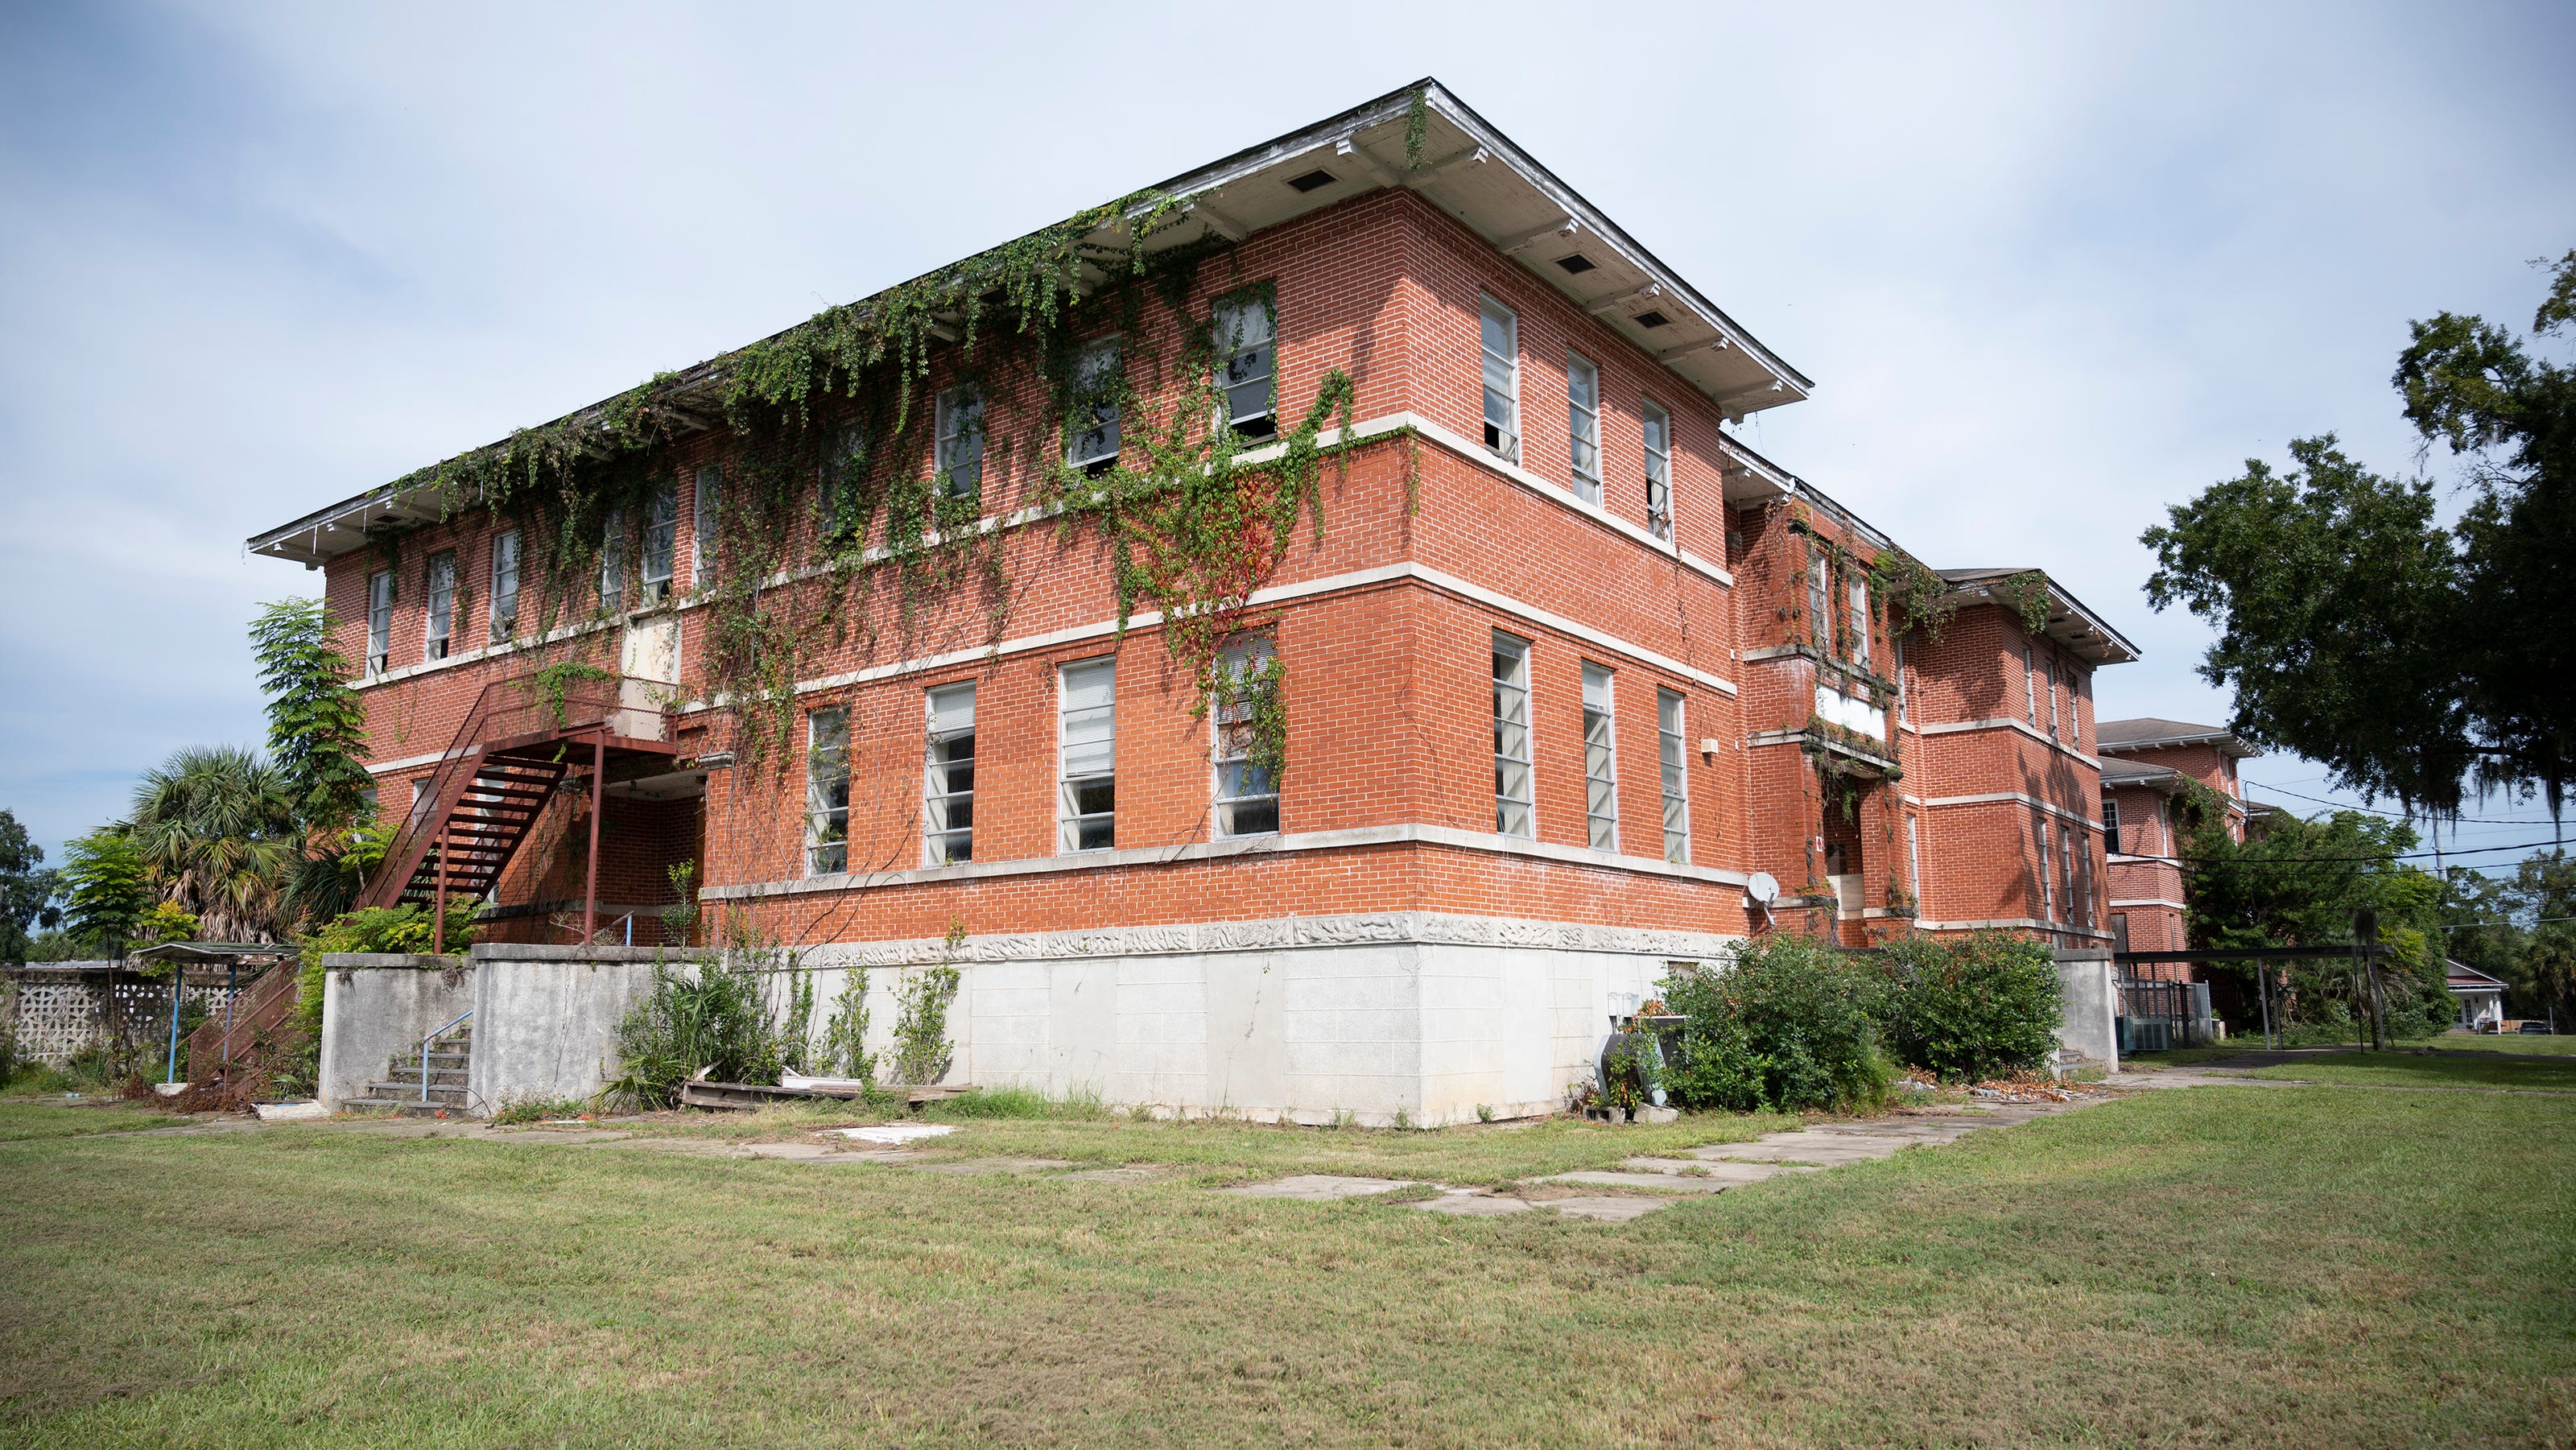 Plans to turn Lee School into apartments delayed in Leesburg, Florida